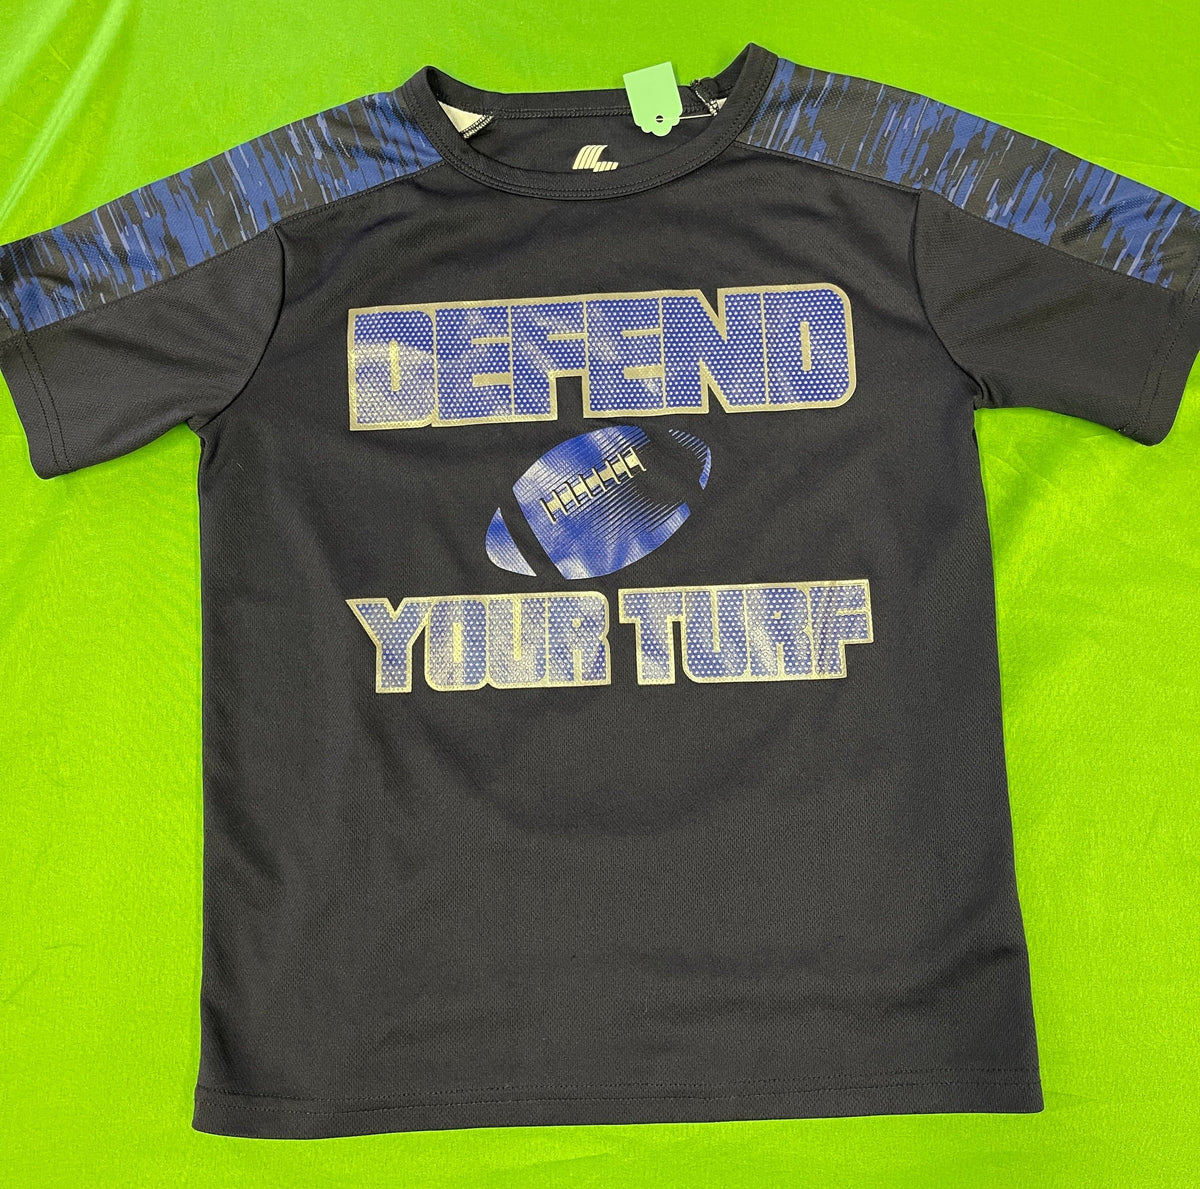 American Football "Defend Your Turf" T-Shirt Youth Small 7-8